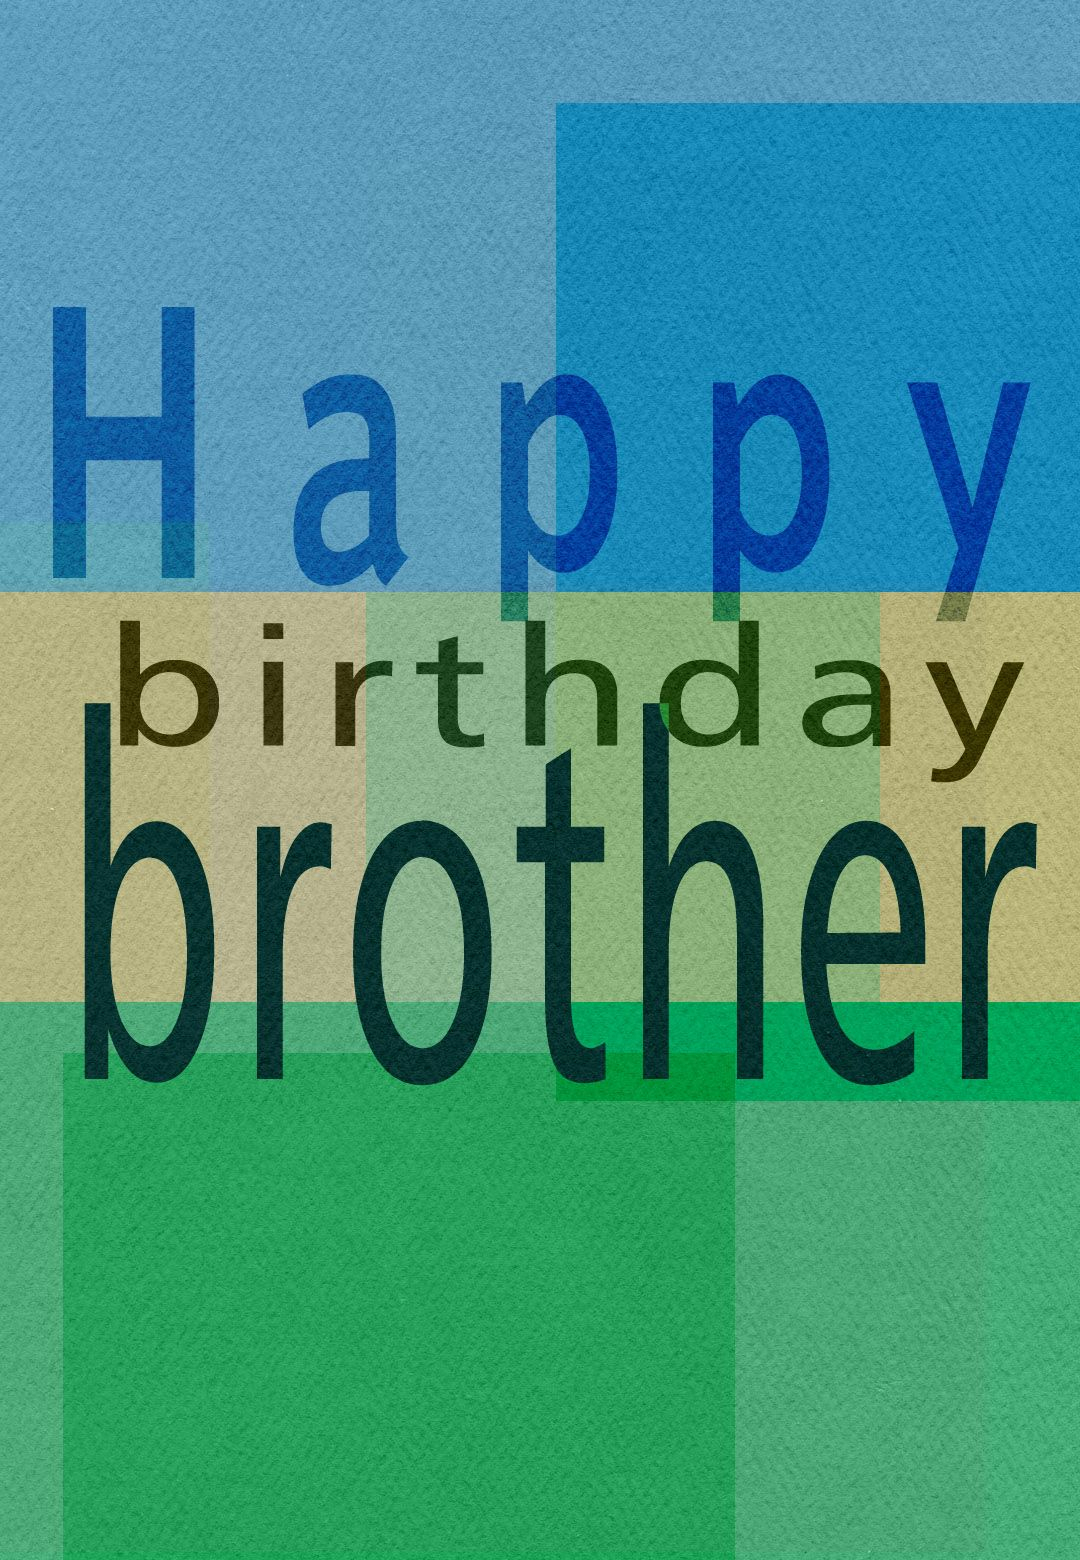 Free Printable Greeting Cards | Gift Ideas | Pinterest | Birthday - Free Printable Birthday Cards For Brother